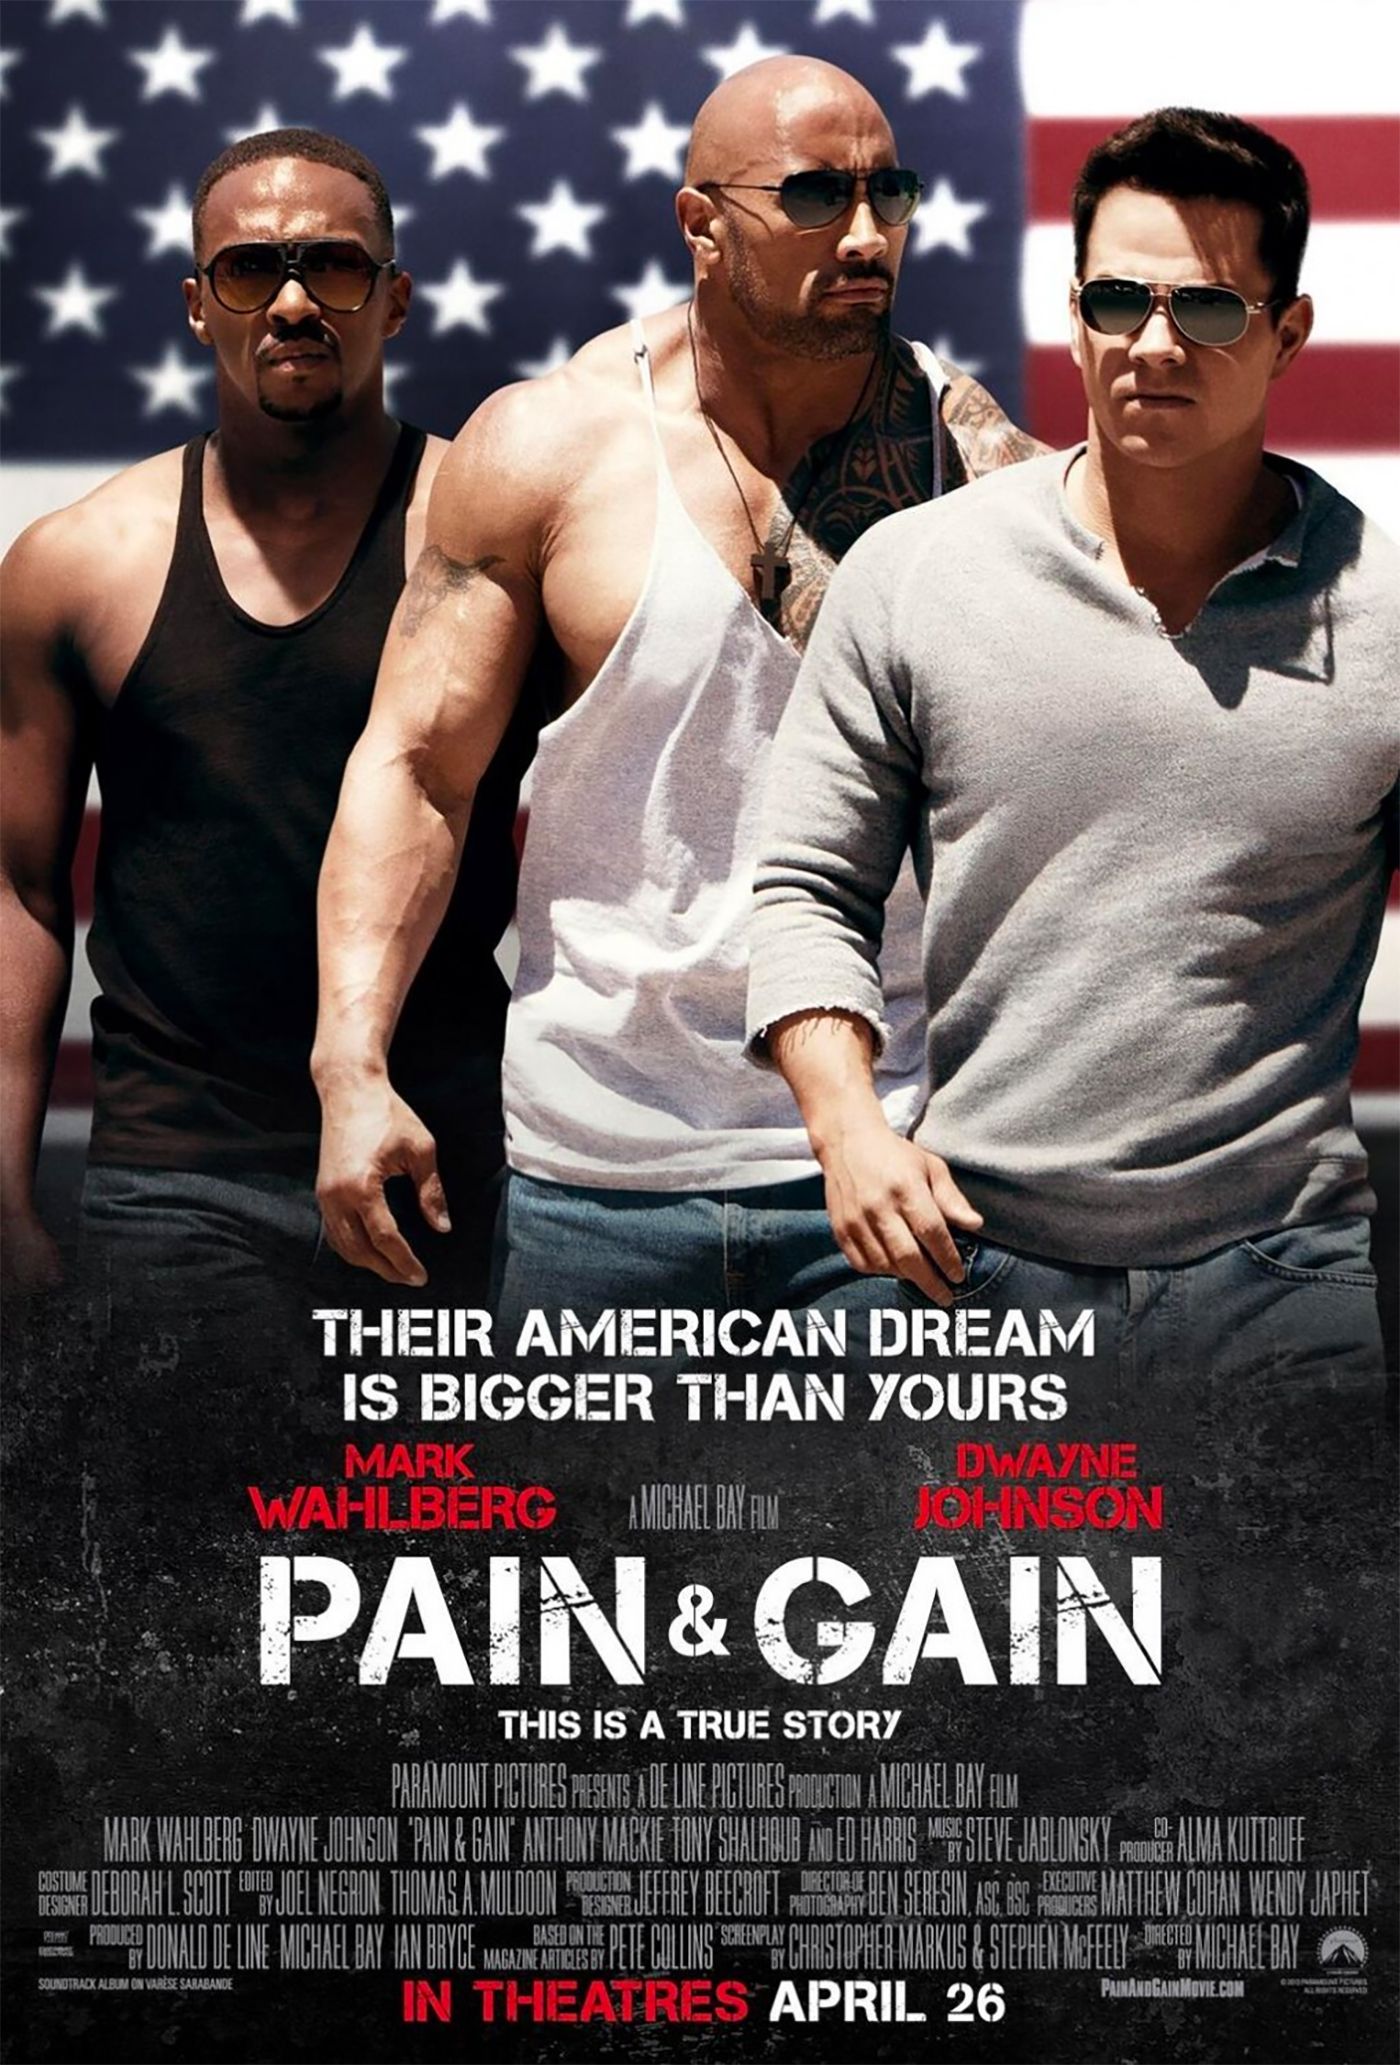 Mark Wahlberg, Dwayne Johnson, and Anthony Mackie in the poster for Pain & Gain